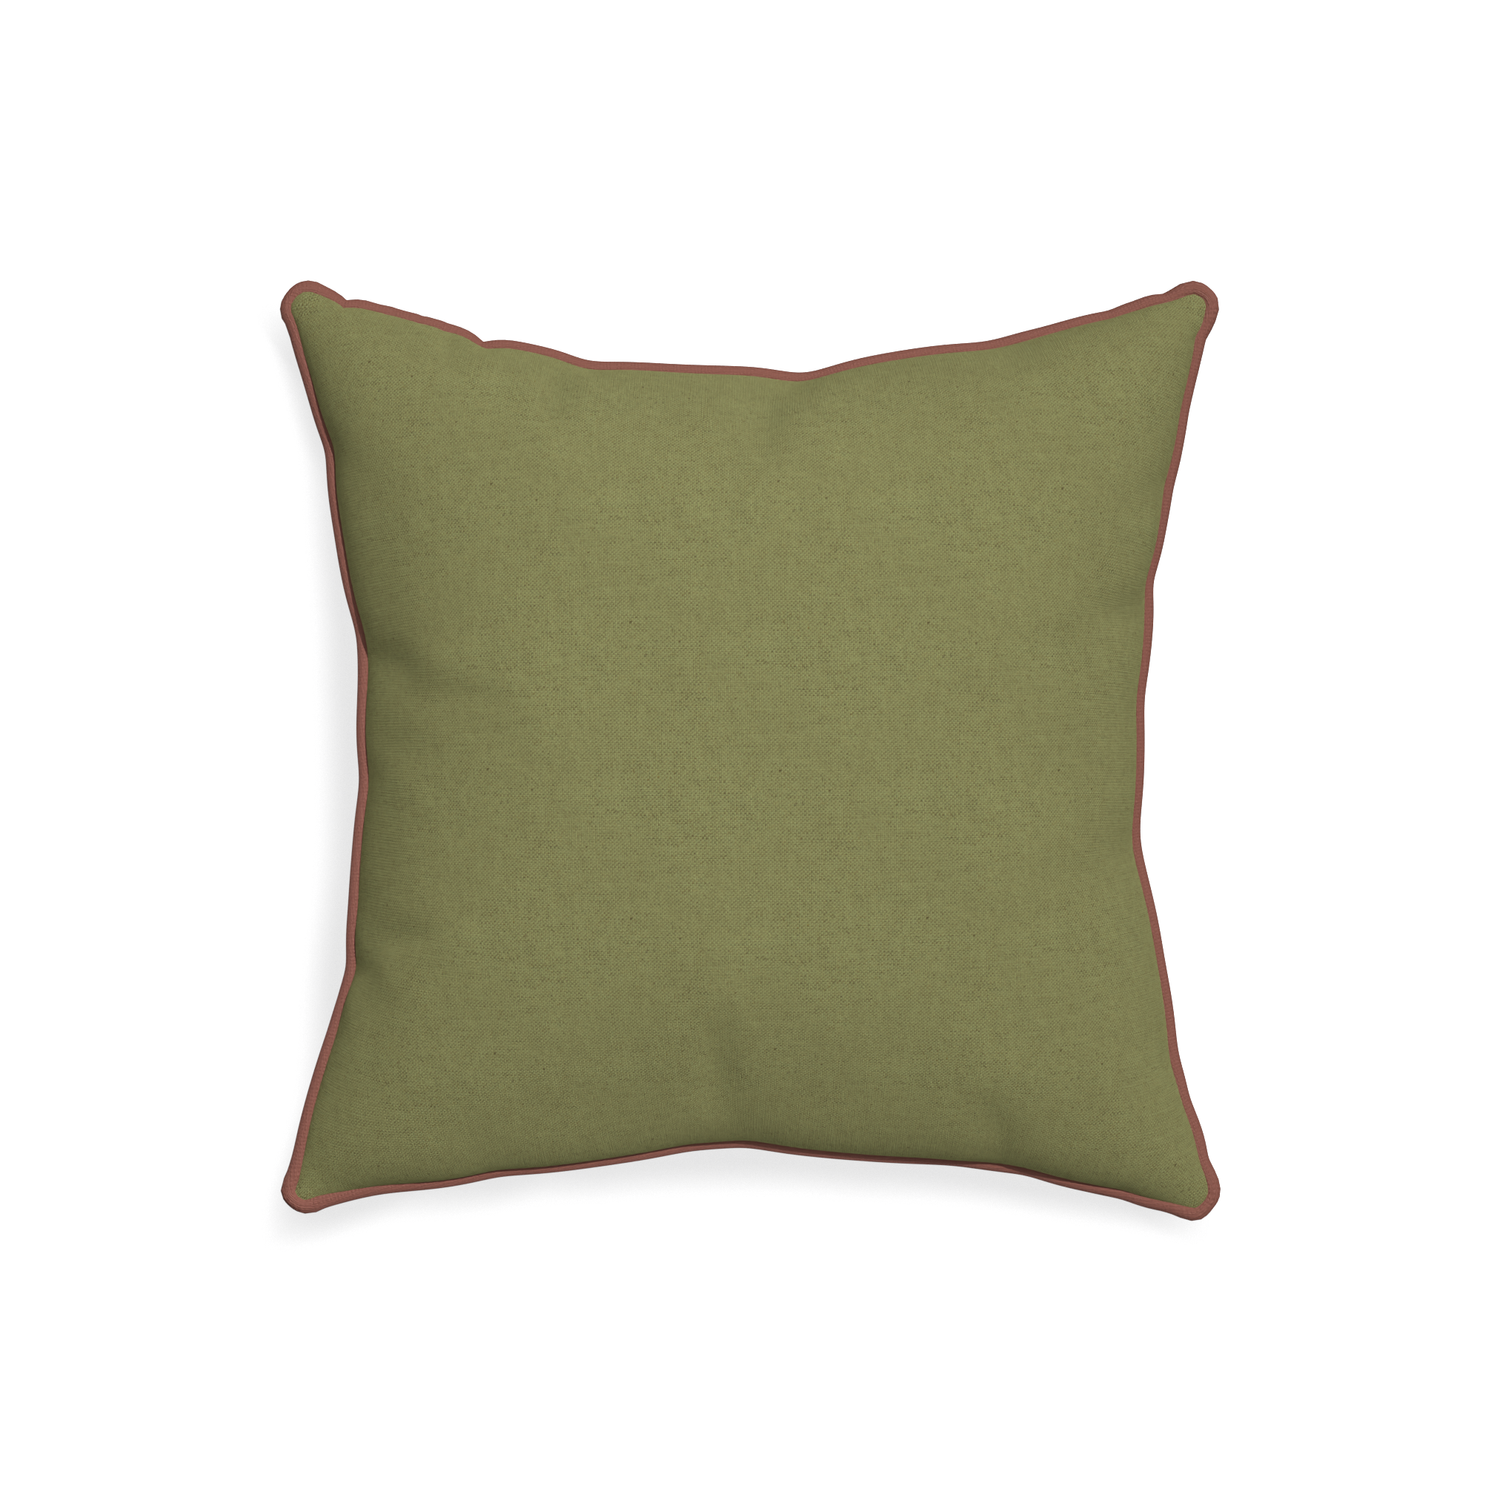 20-square moss custom moss greenpillow with w piping on white background